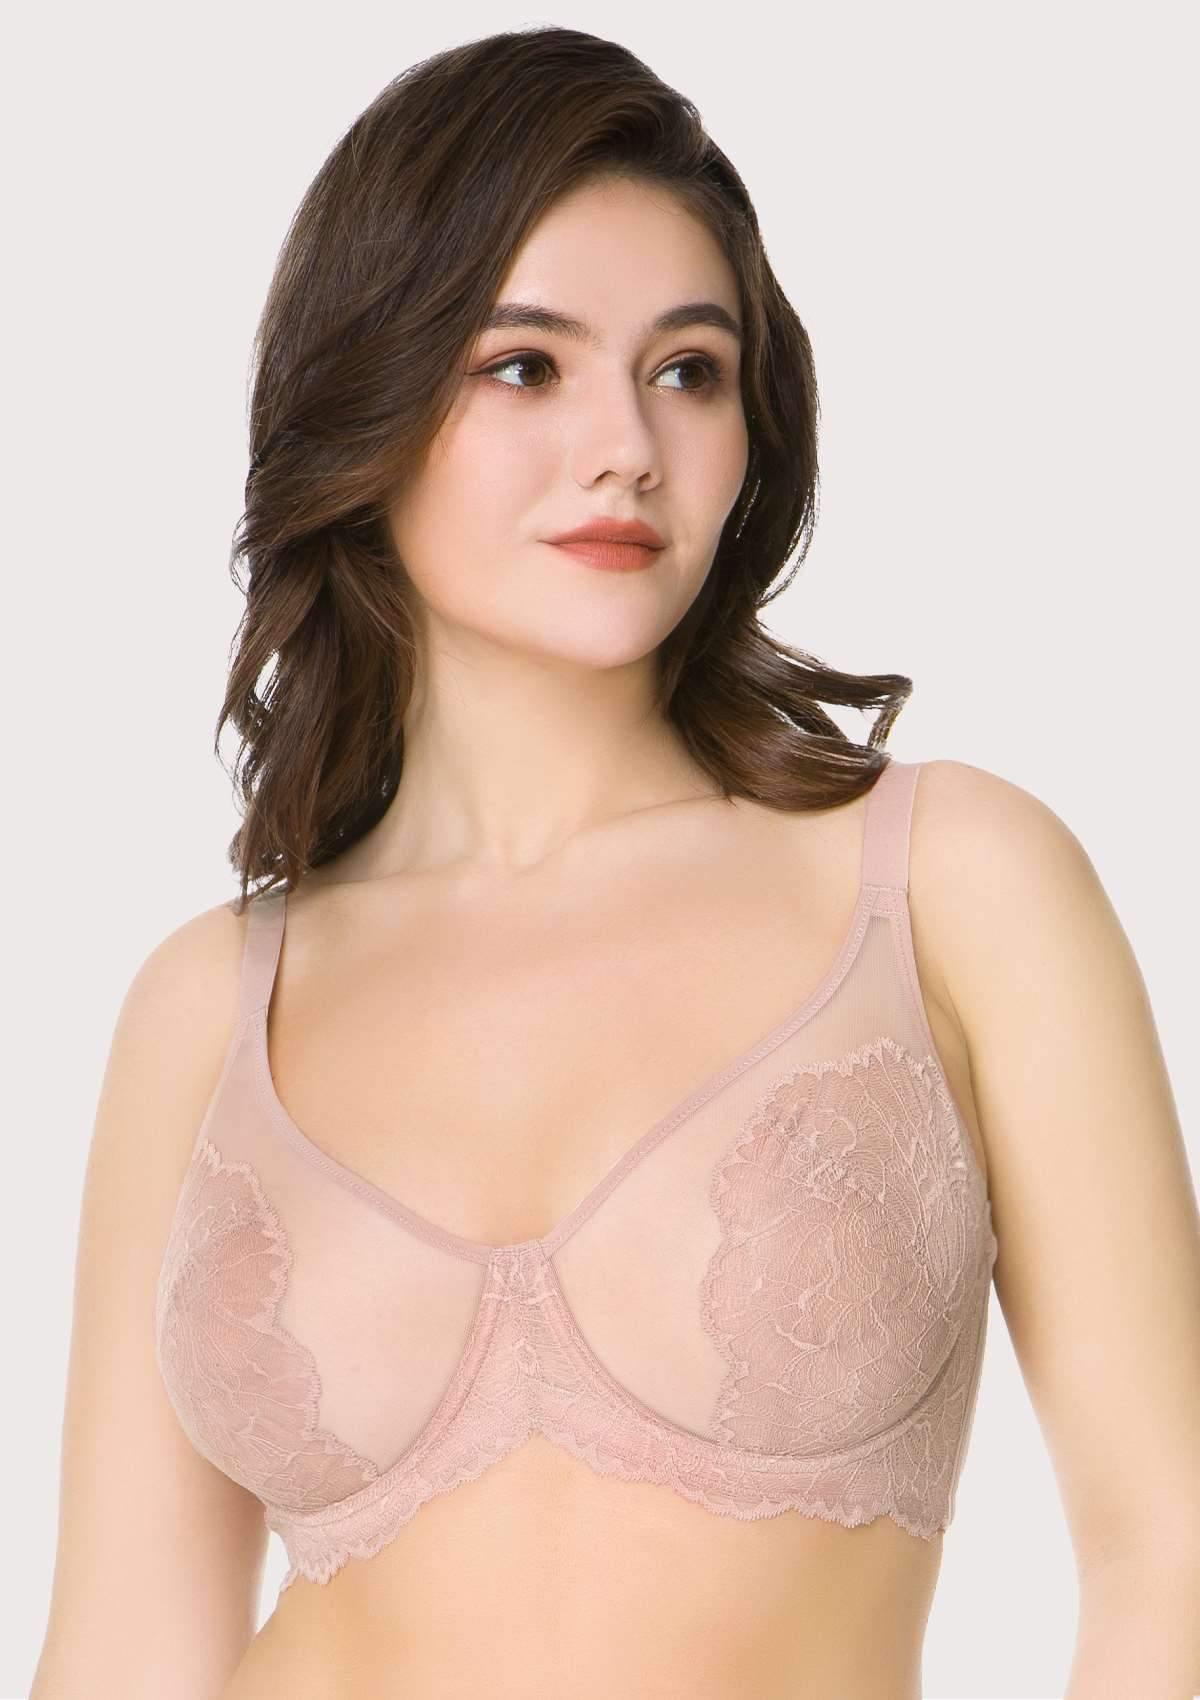 HSIA Blossom Lace Bra And Panties Set: Best Bra For Large Busts - Dark Pink / 38 / C